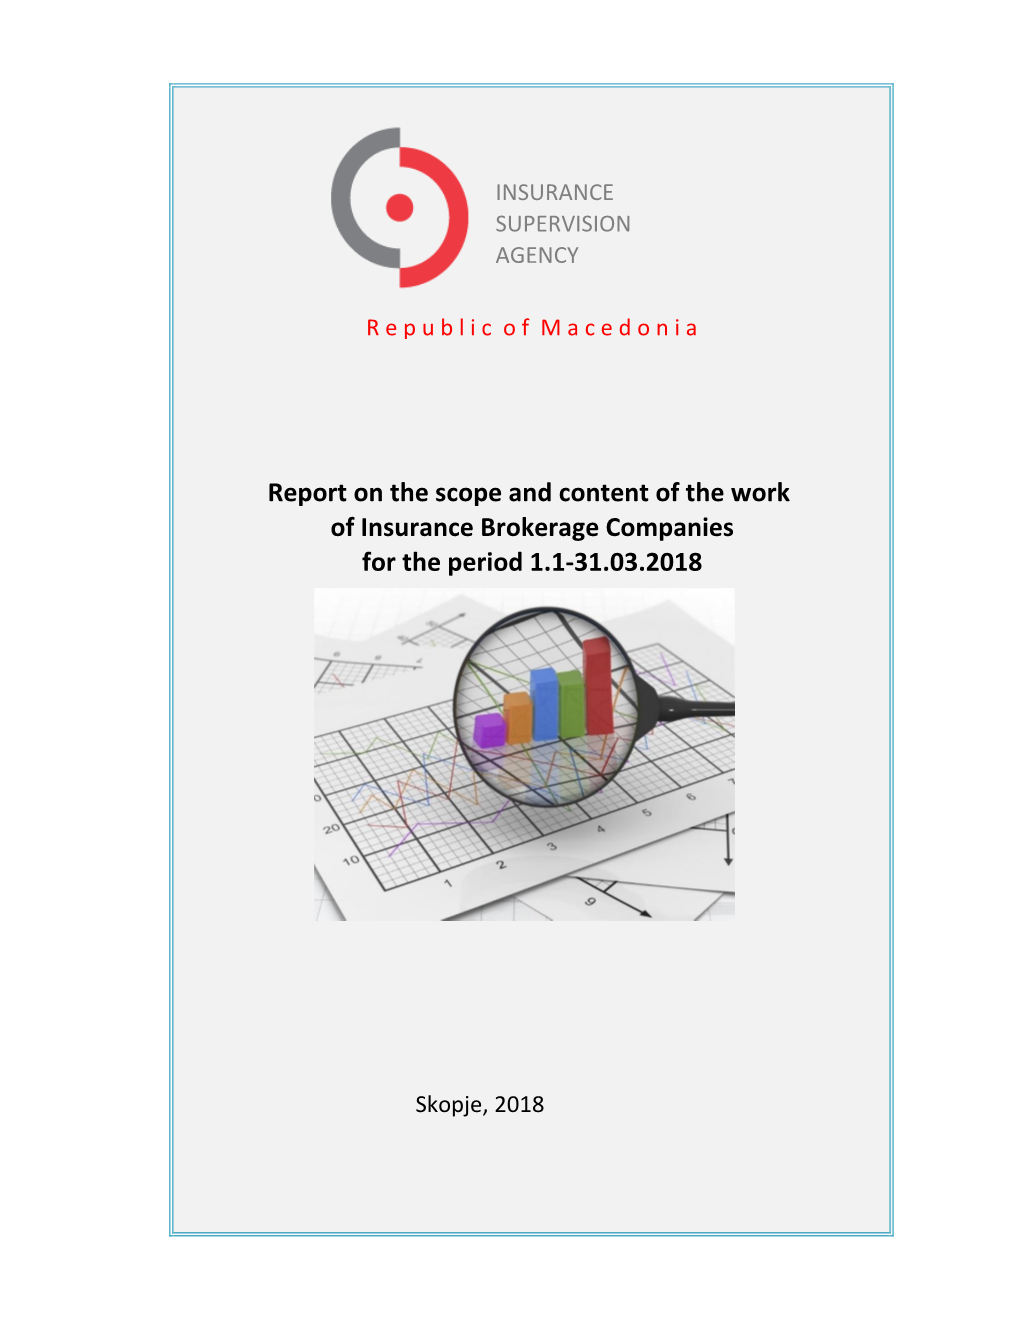 Report on the Scope and Content of the Work of Insurance Brokerage Companies for the Period 1.1-31.03.2018